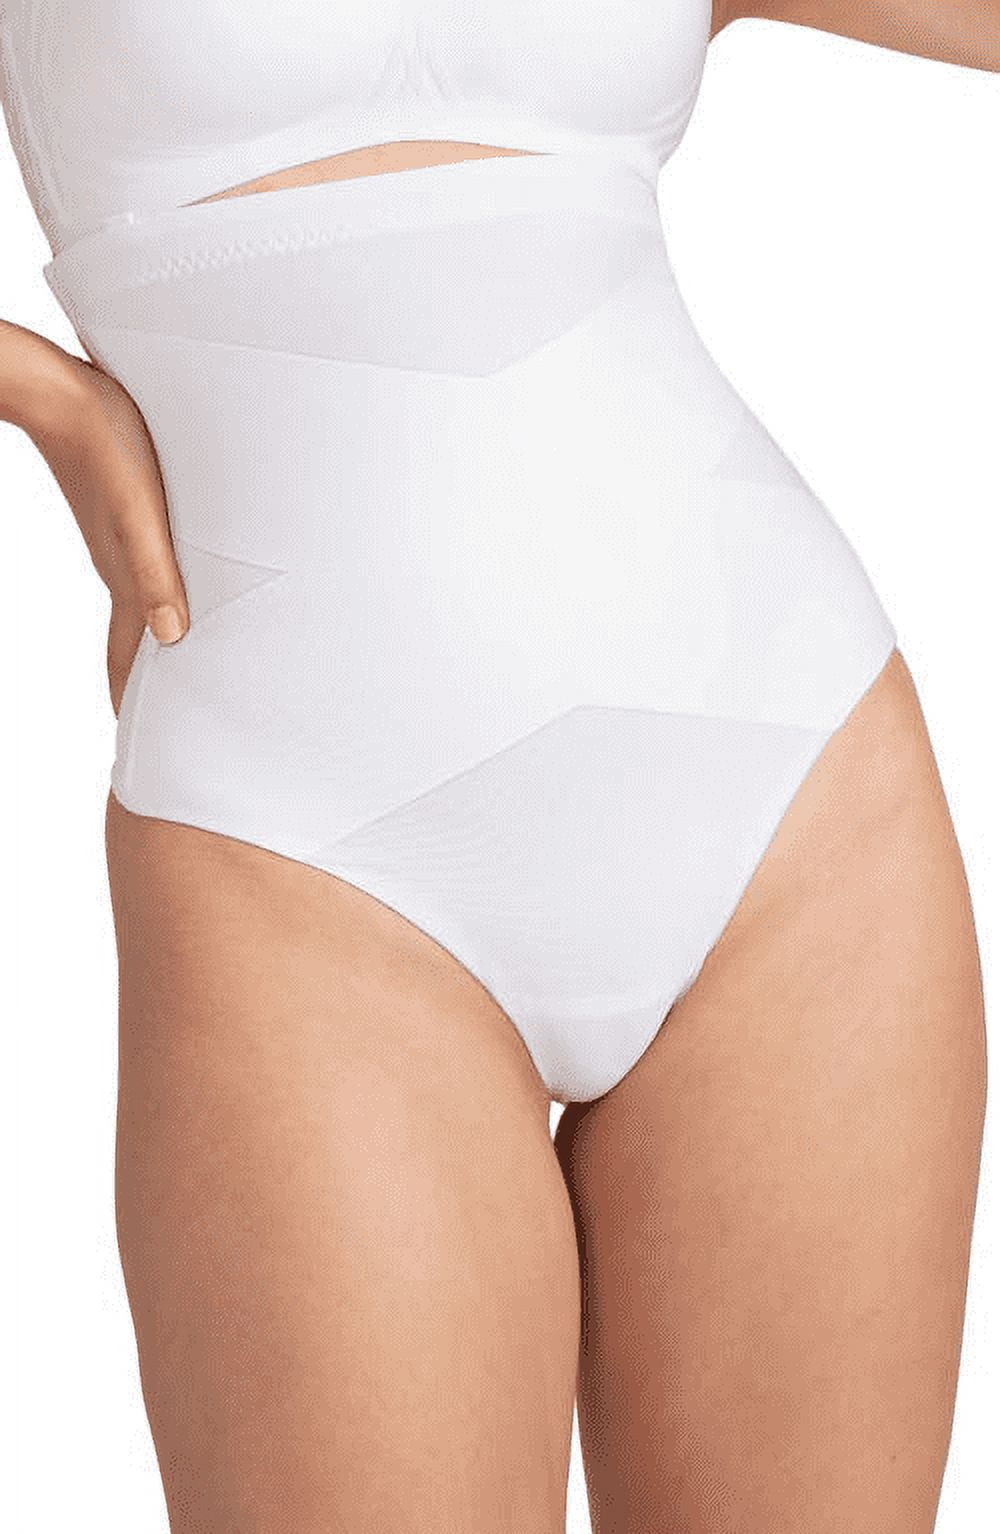 Honeylove ASTRAL SuperPower Firm Control Thong, US 1X 